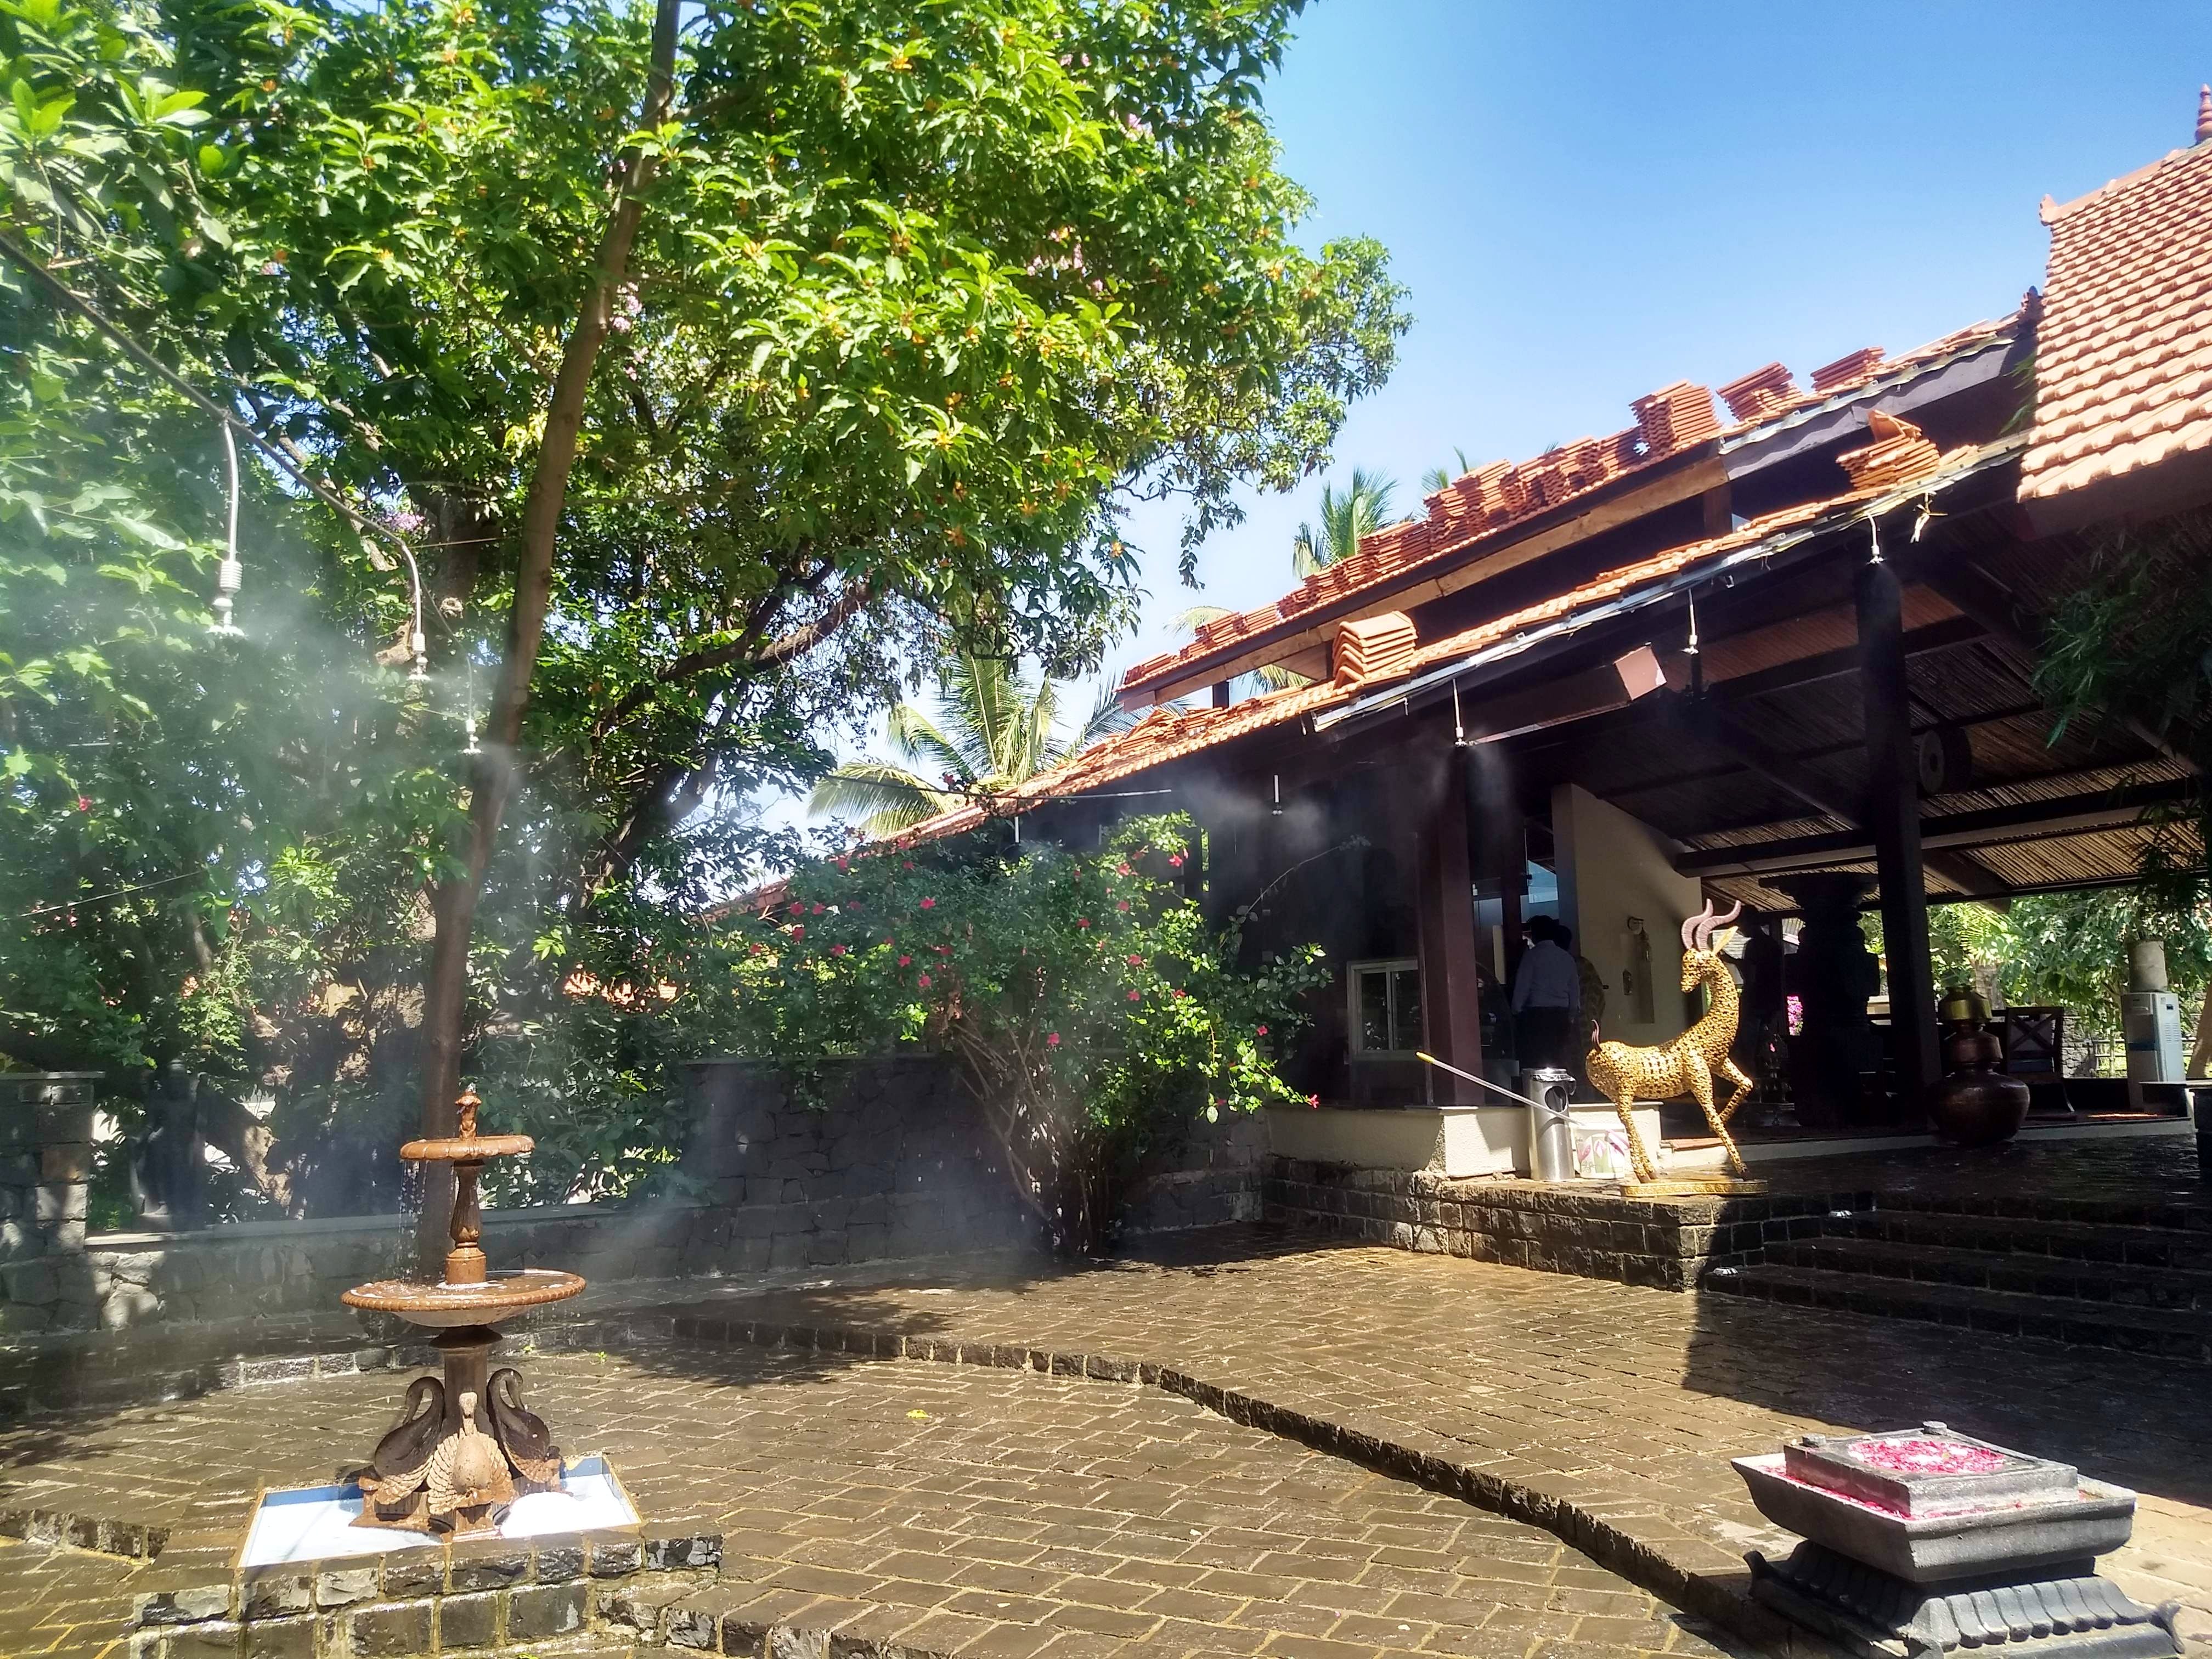 Sky,Architecture,Tree,Building,House,Sunlight,Roof,Temple,Courtyard,Leisure